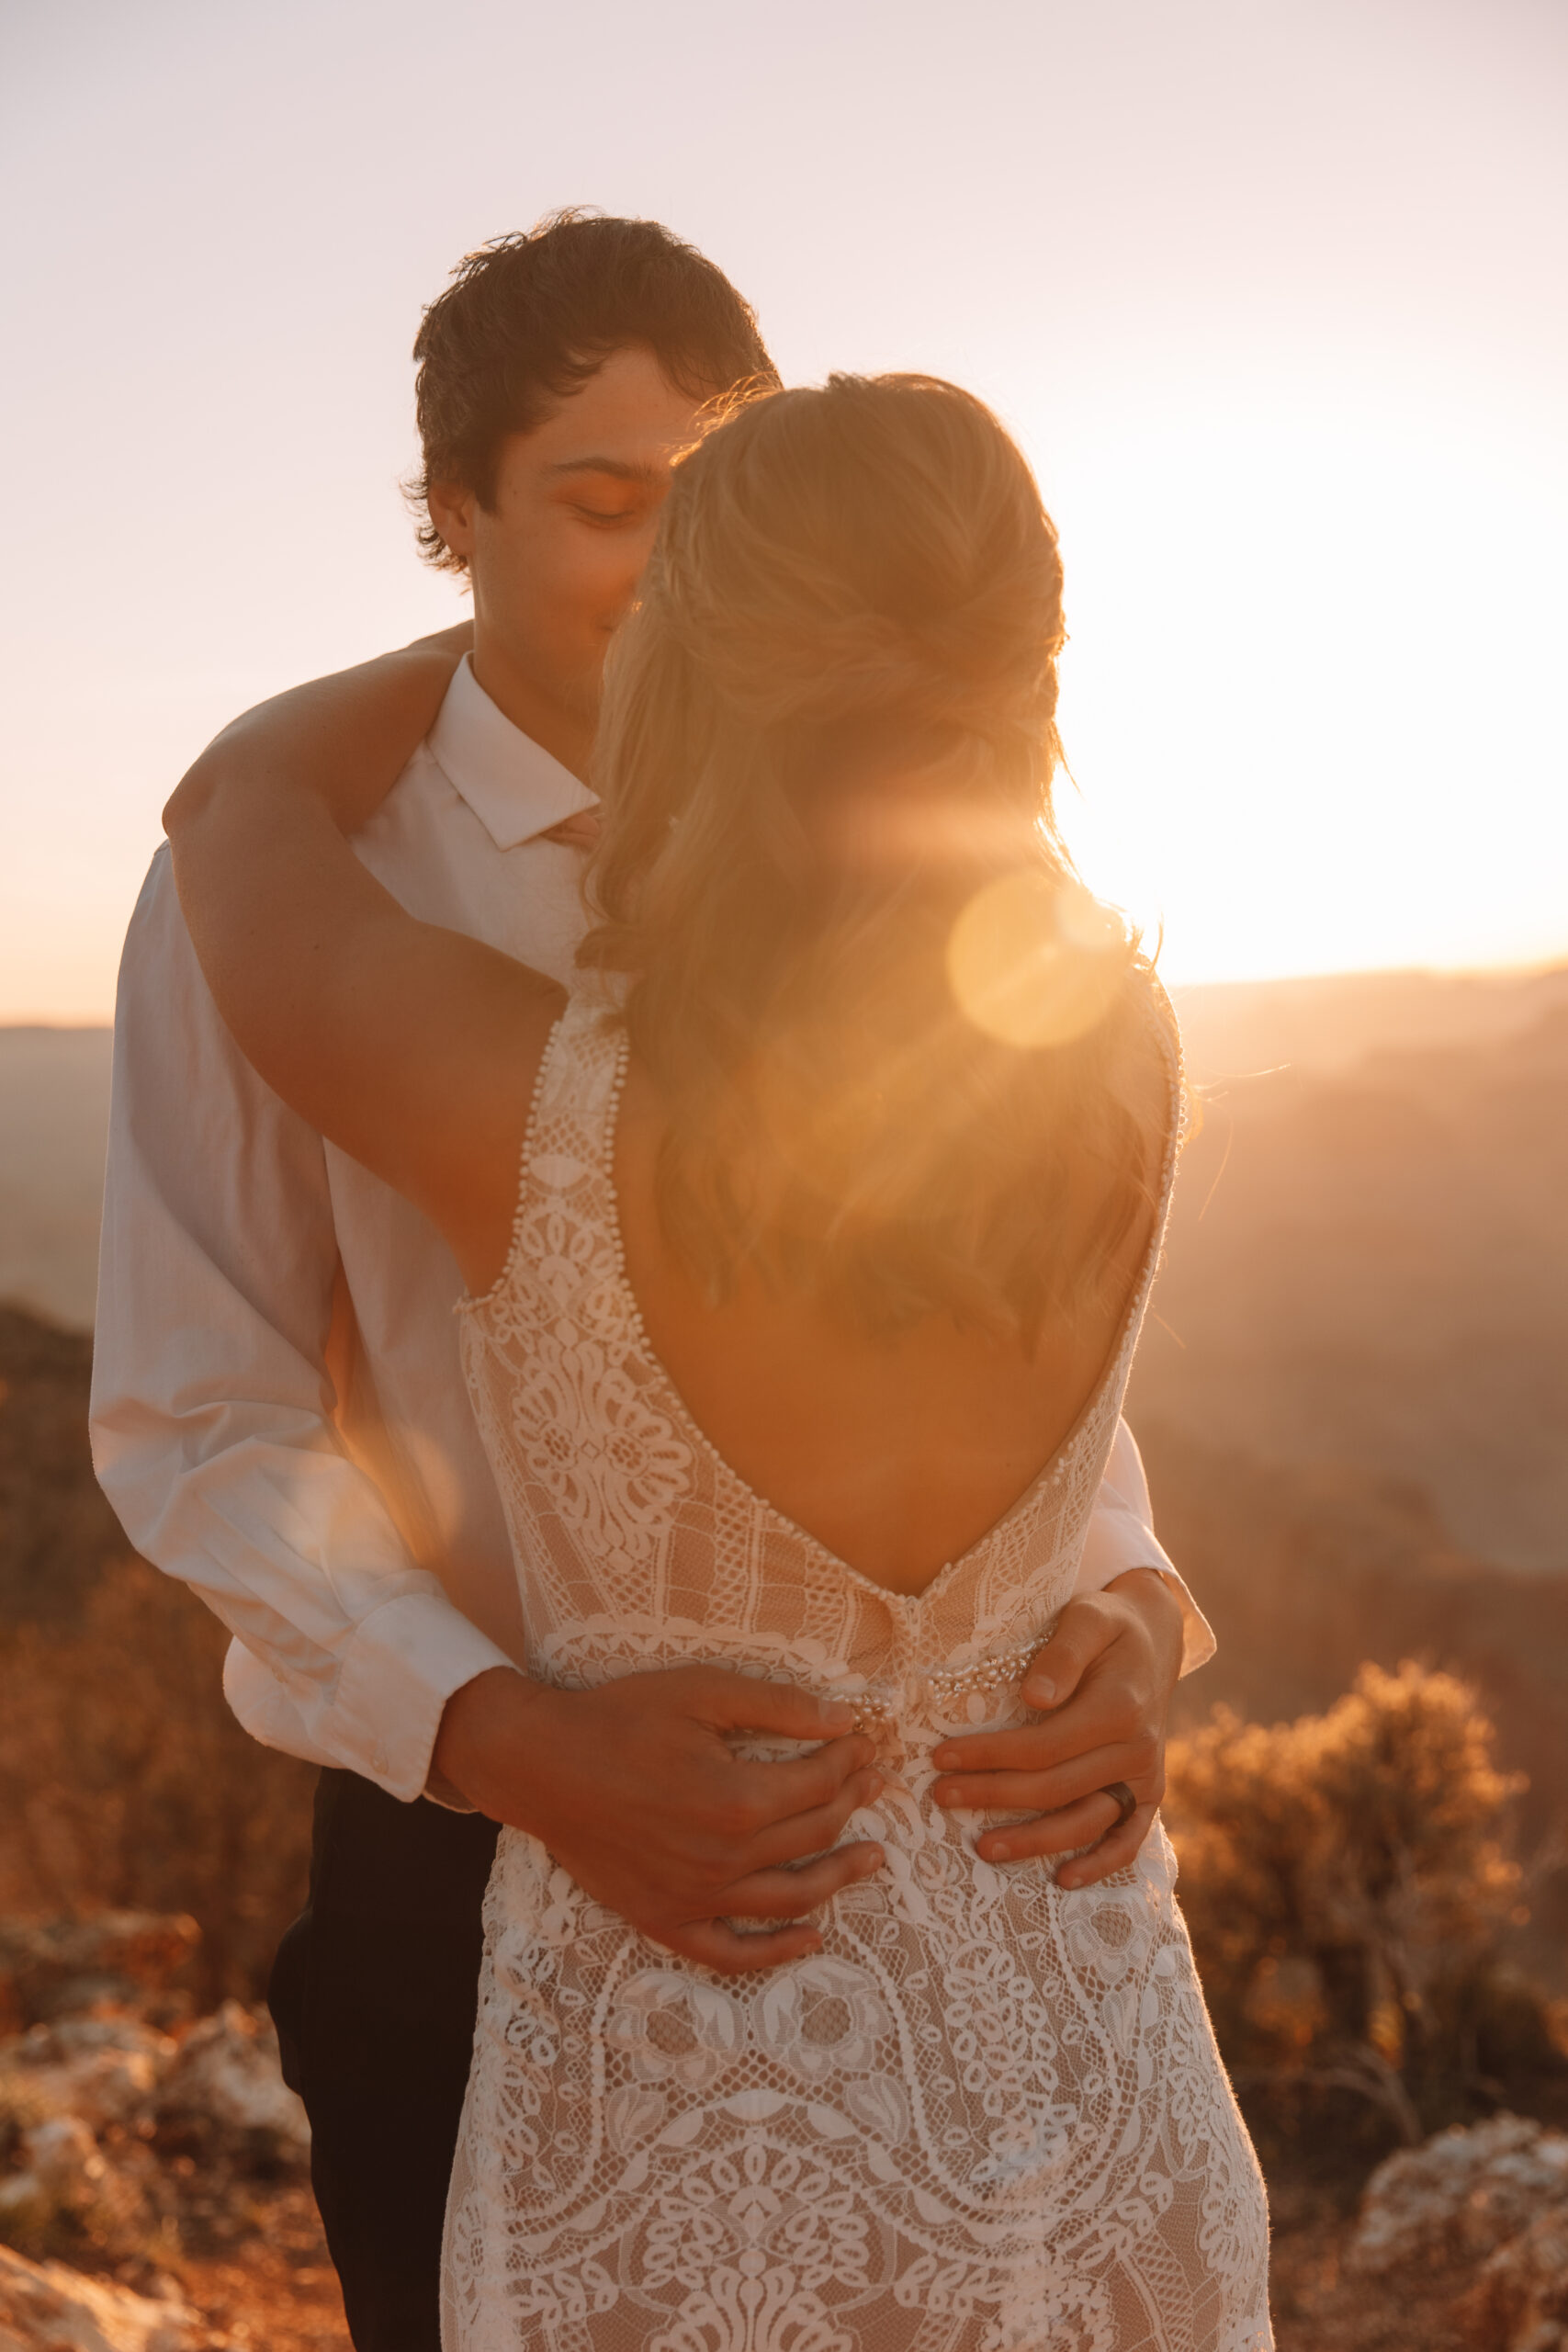 A groom holding his bride while her back is visible to us in her stunning lace open back wedding dress. The sun is setting behind them in the Grand Canyon in Arizona